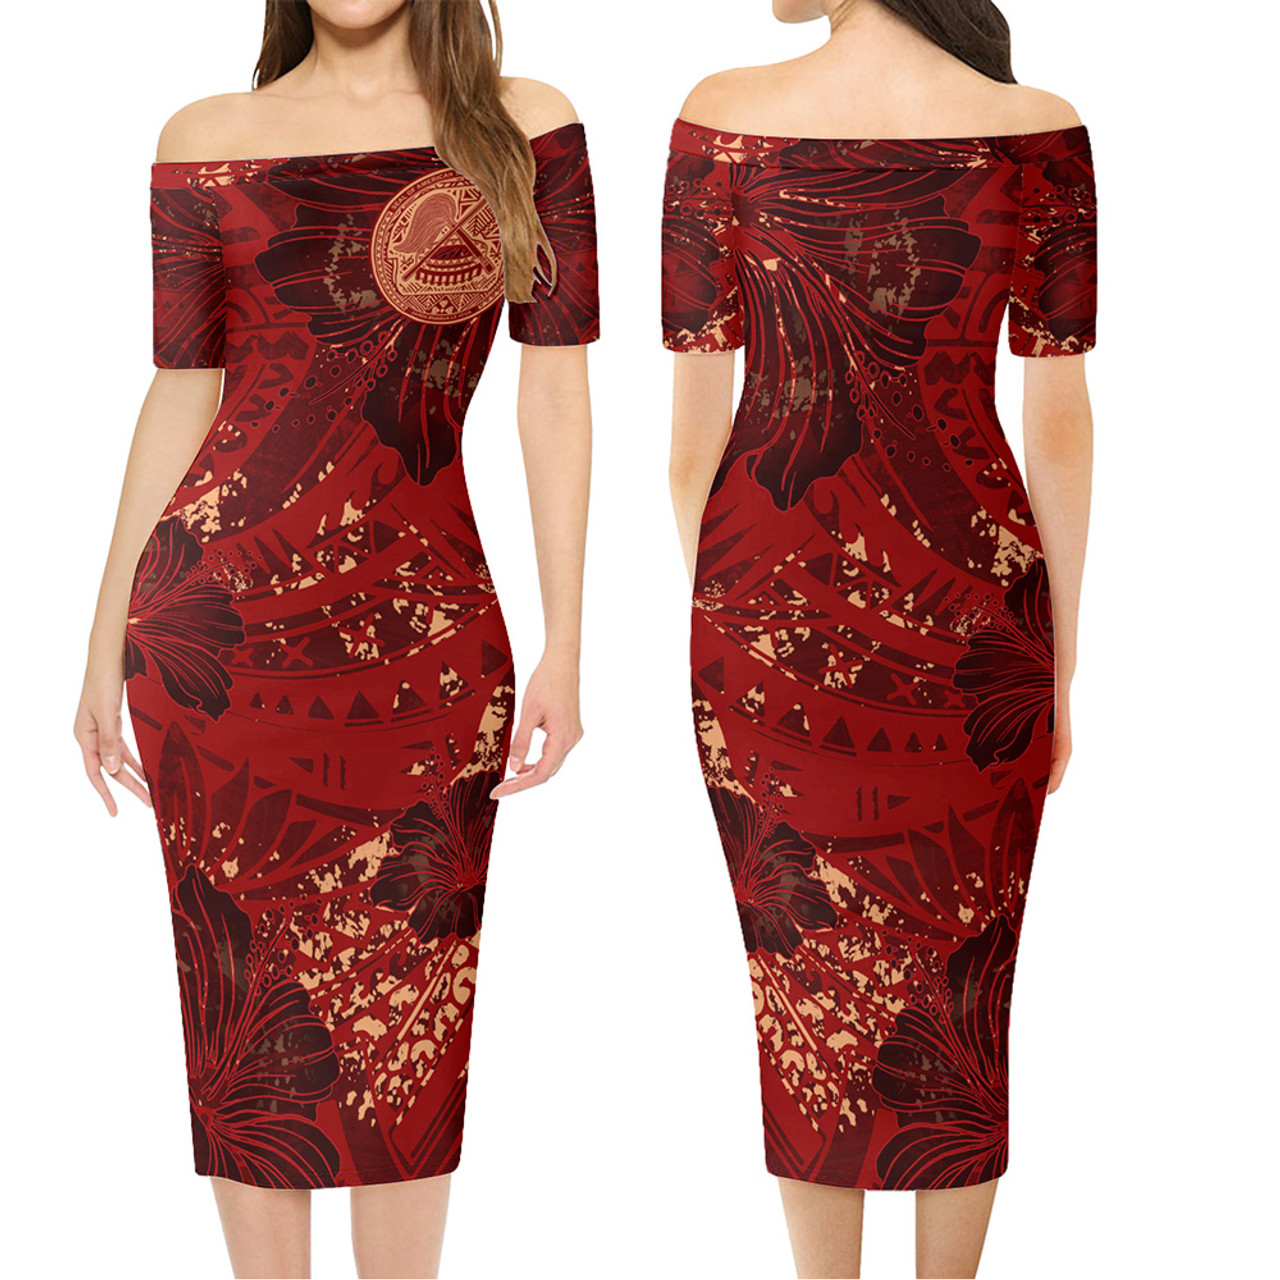 American Samoa Combo Short Sleeve Dress And Shirt Hibiscus With Polynesian Pattern Red Version